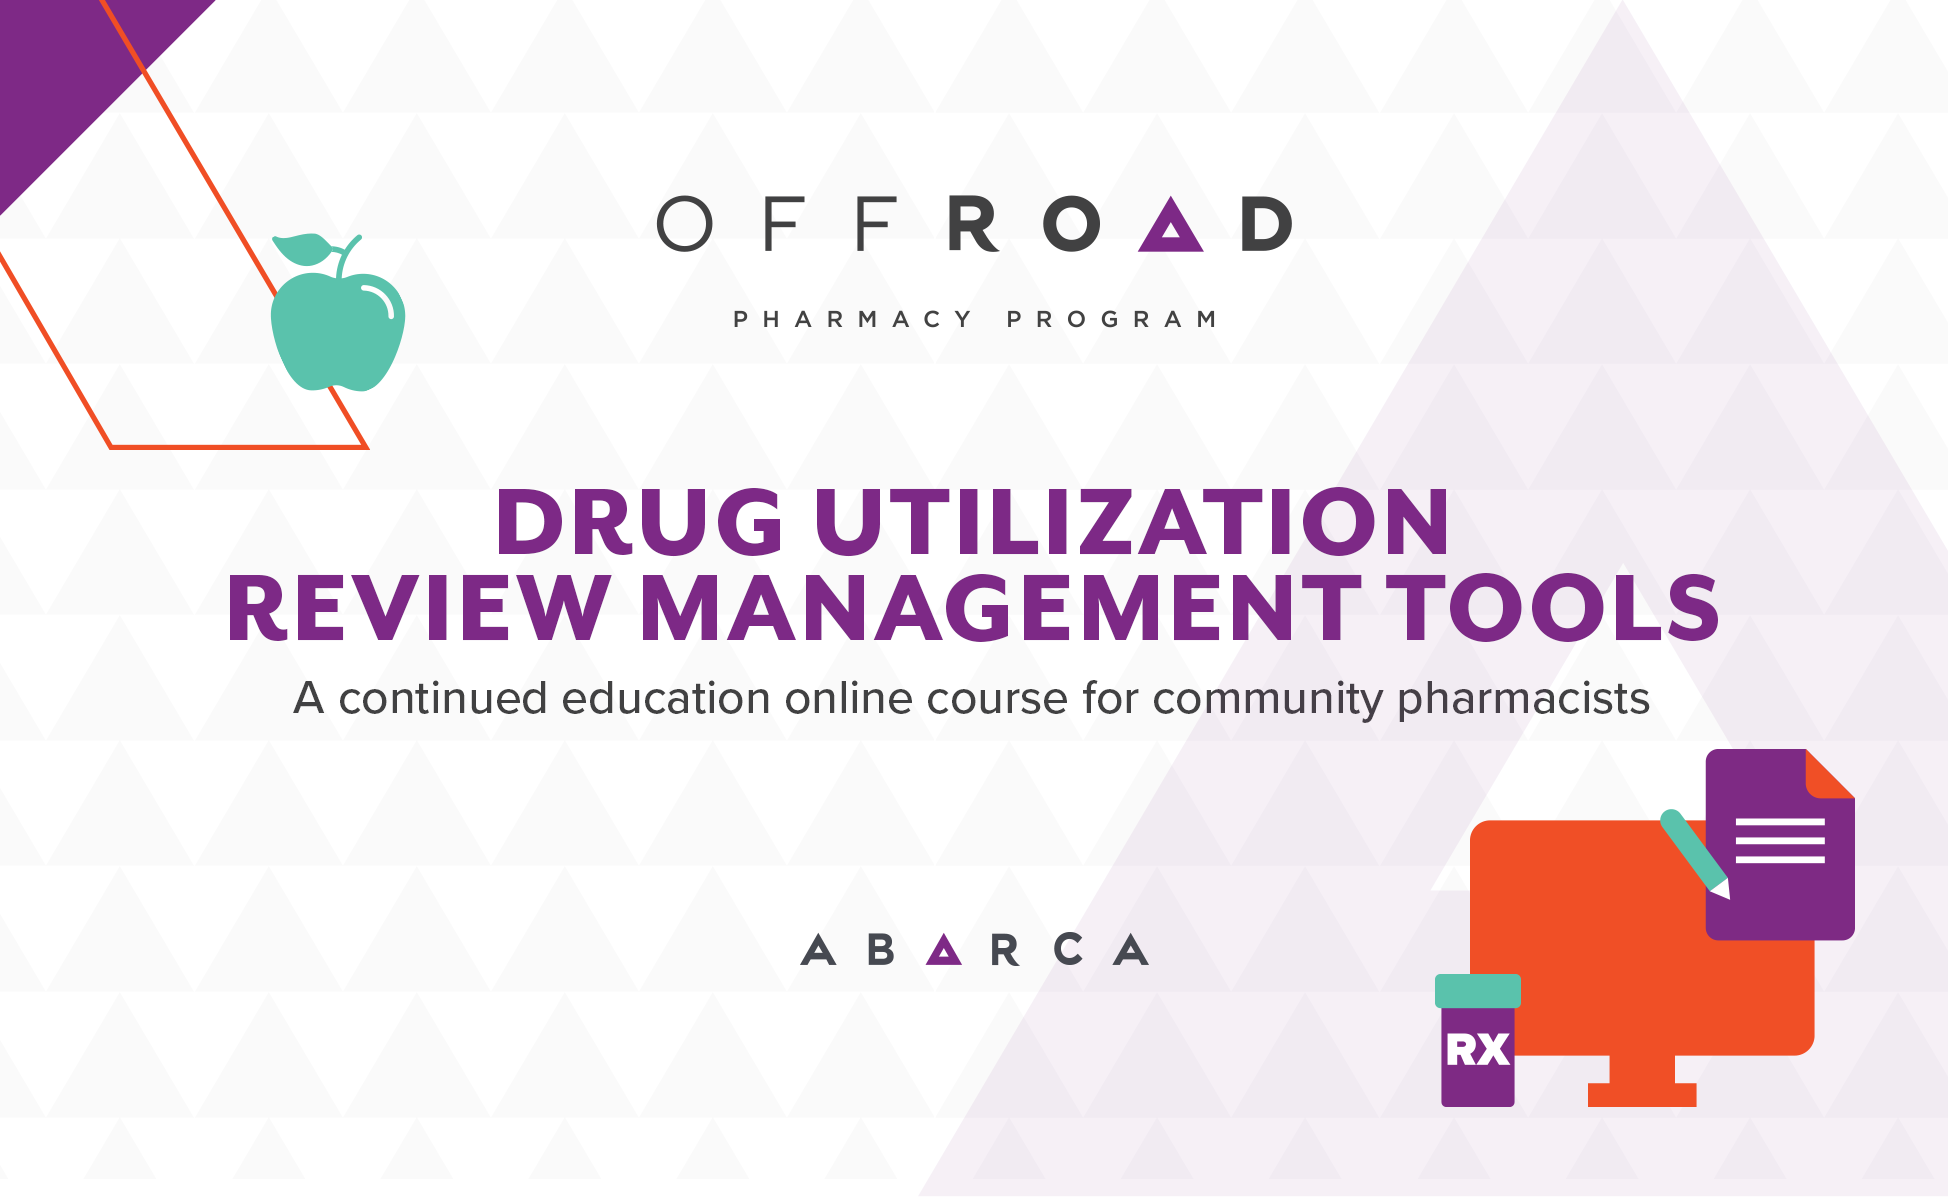 Abarca teams up with Colegio de Farmacéticos de Puerto Rico to offer our first online continuing education course for community pharmacists